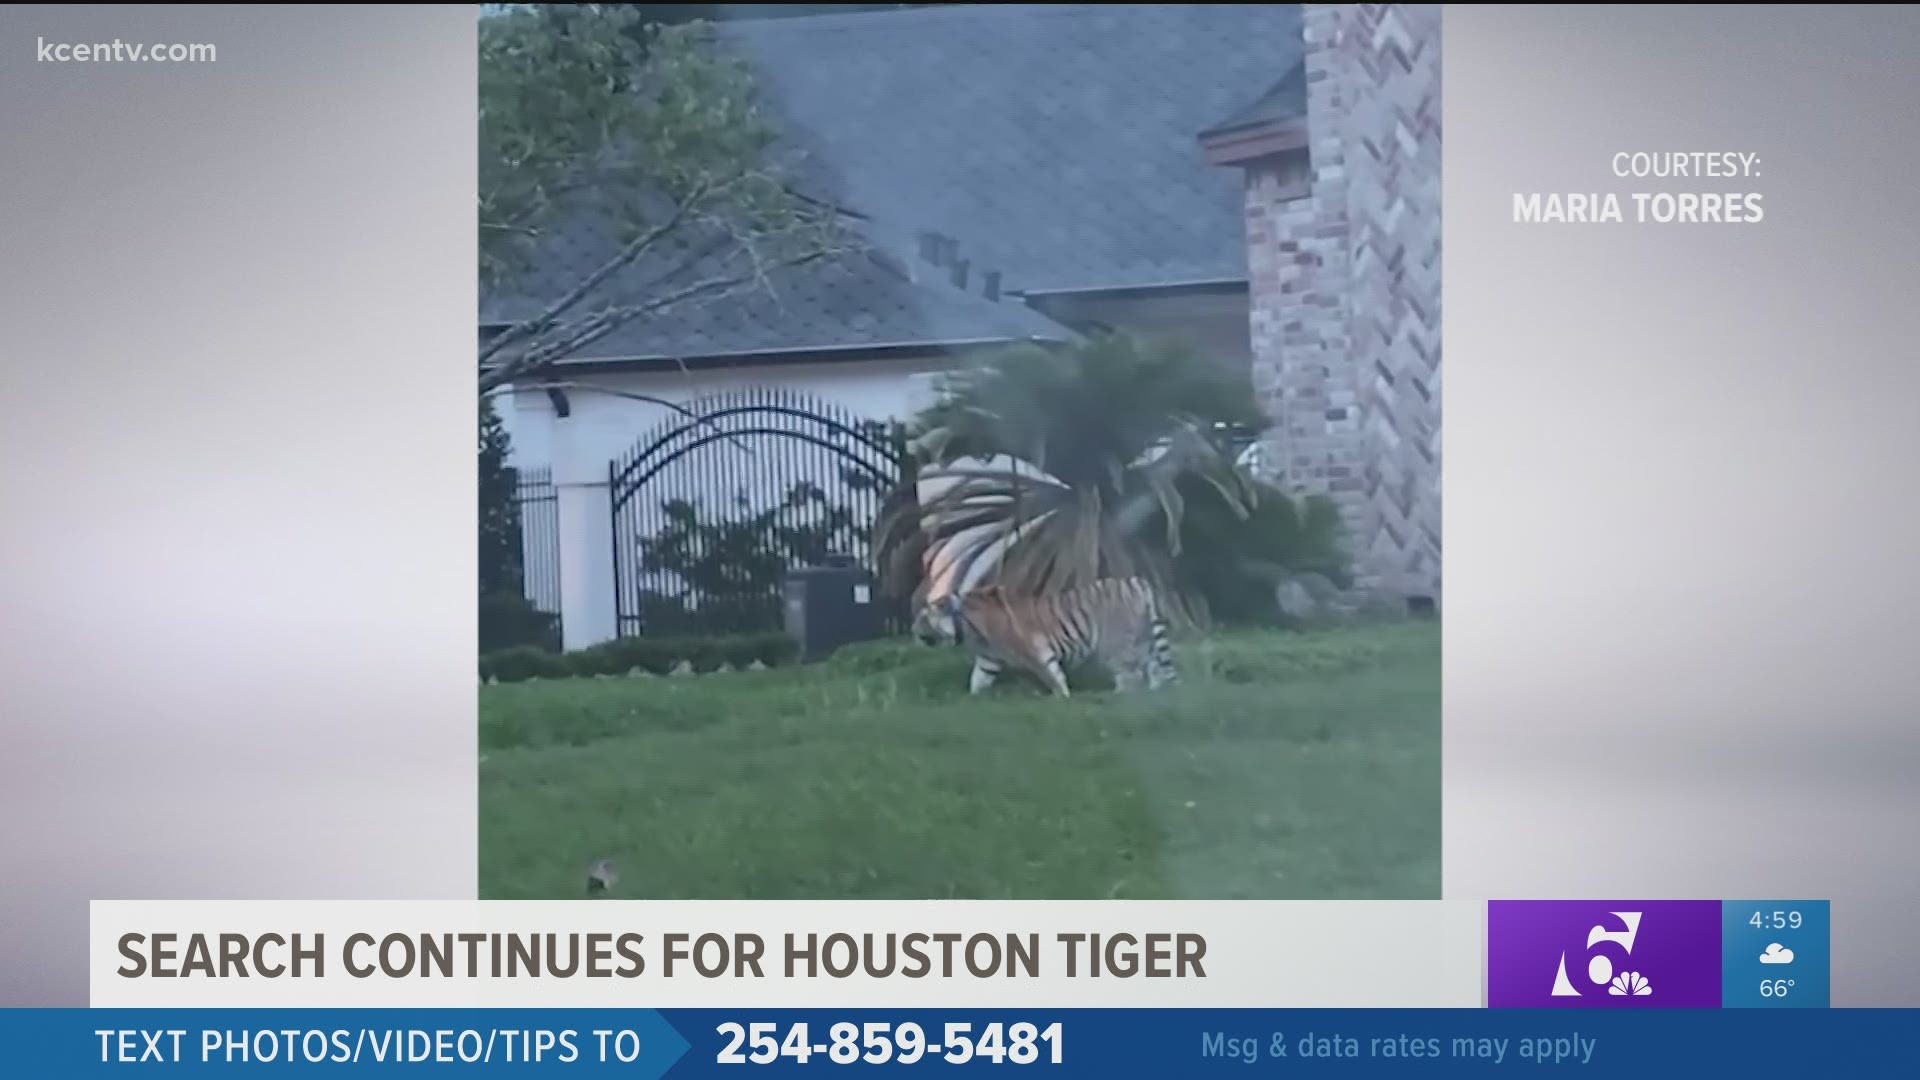 The tiger's owner is a man out on bond for murder in Fort Bend County, who is now fleeing from officials with the big cat.